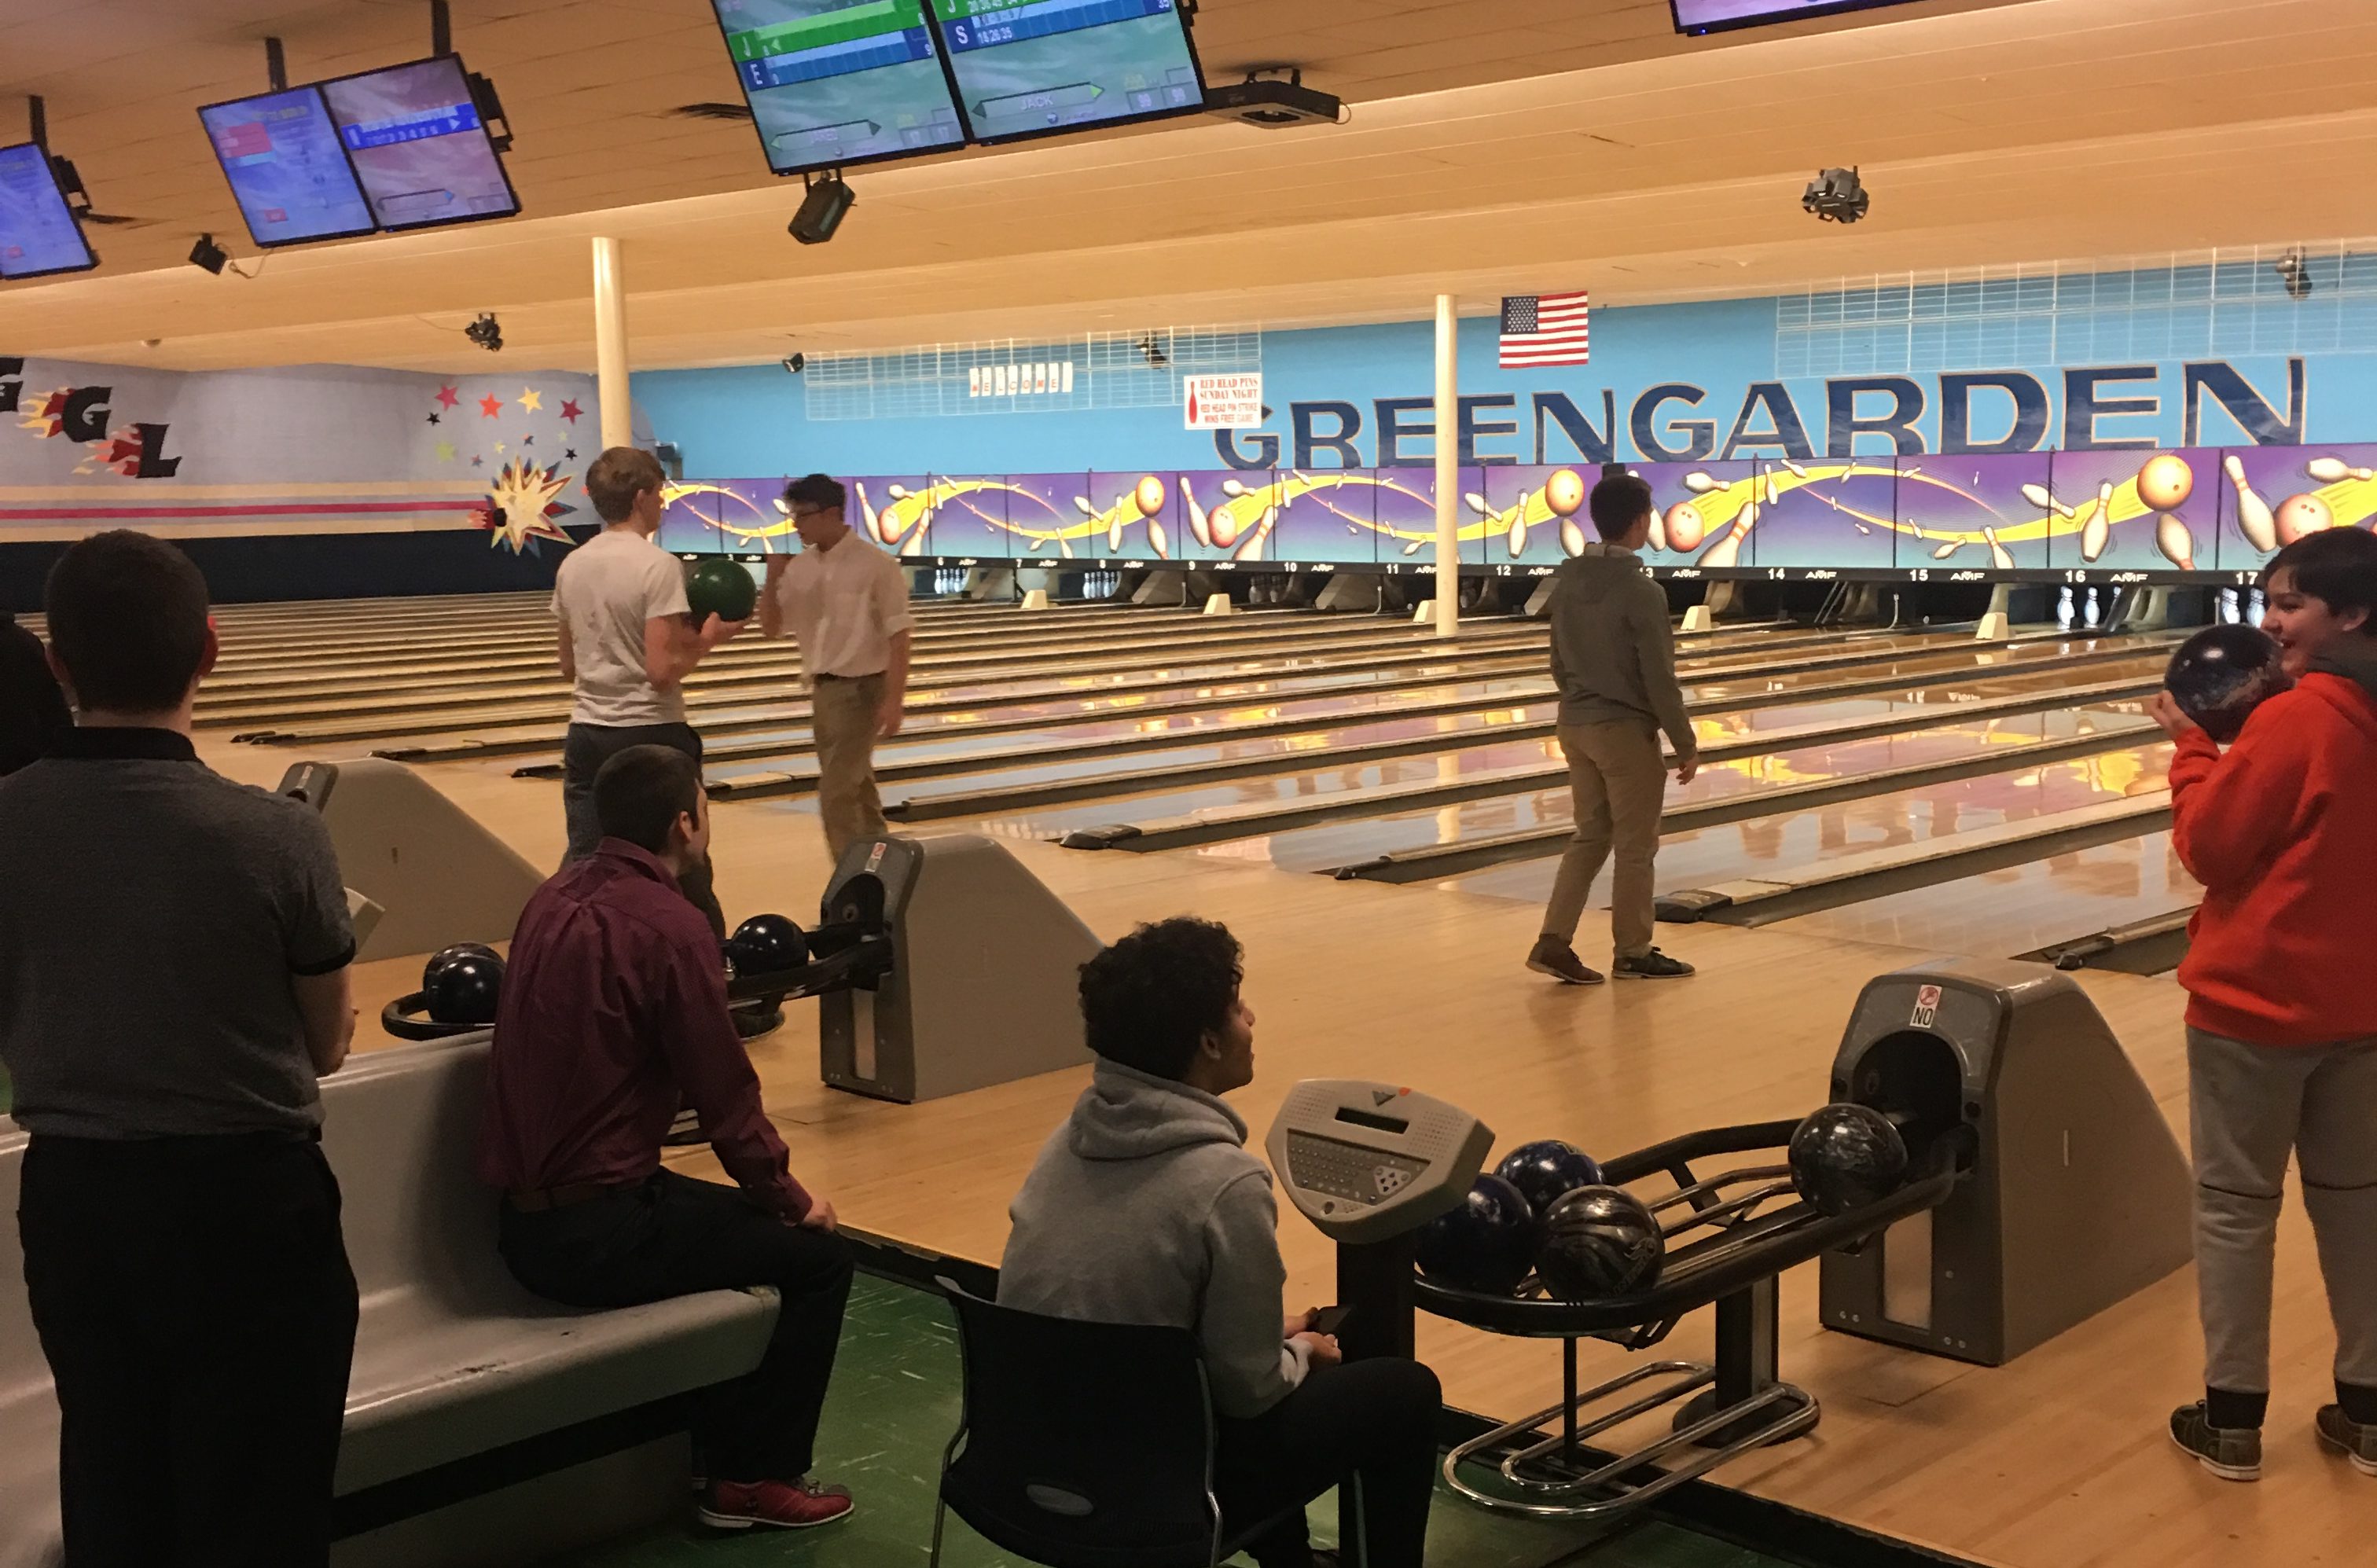 Cp Bowling Club Holds First Meeting At Greengarden Lanes The Rambler